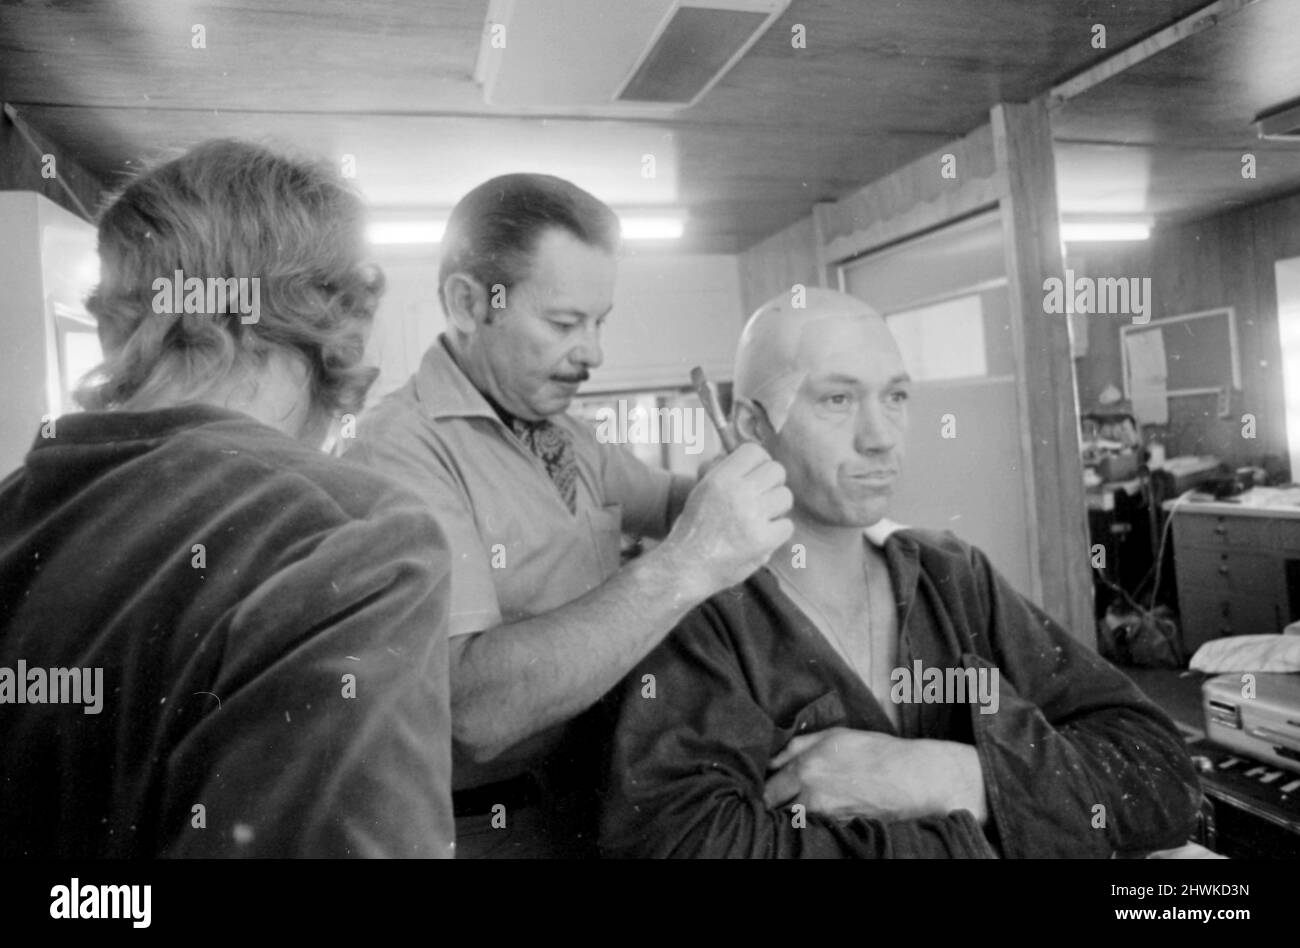 David Carradine actor has his makeup applied on set of TV programme Kung Fu (1972-1975), piictured November 1973.   Kung Fu follows the adventures of a Shaolin monk, Kwai Chang Caine who travels through the American Old West armed only with his skill in martial arts, as he seeks his half-brother, Danny Caine.   *** Local Caption *** Grasshopper Stock Photo